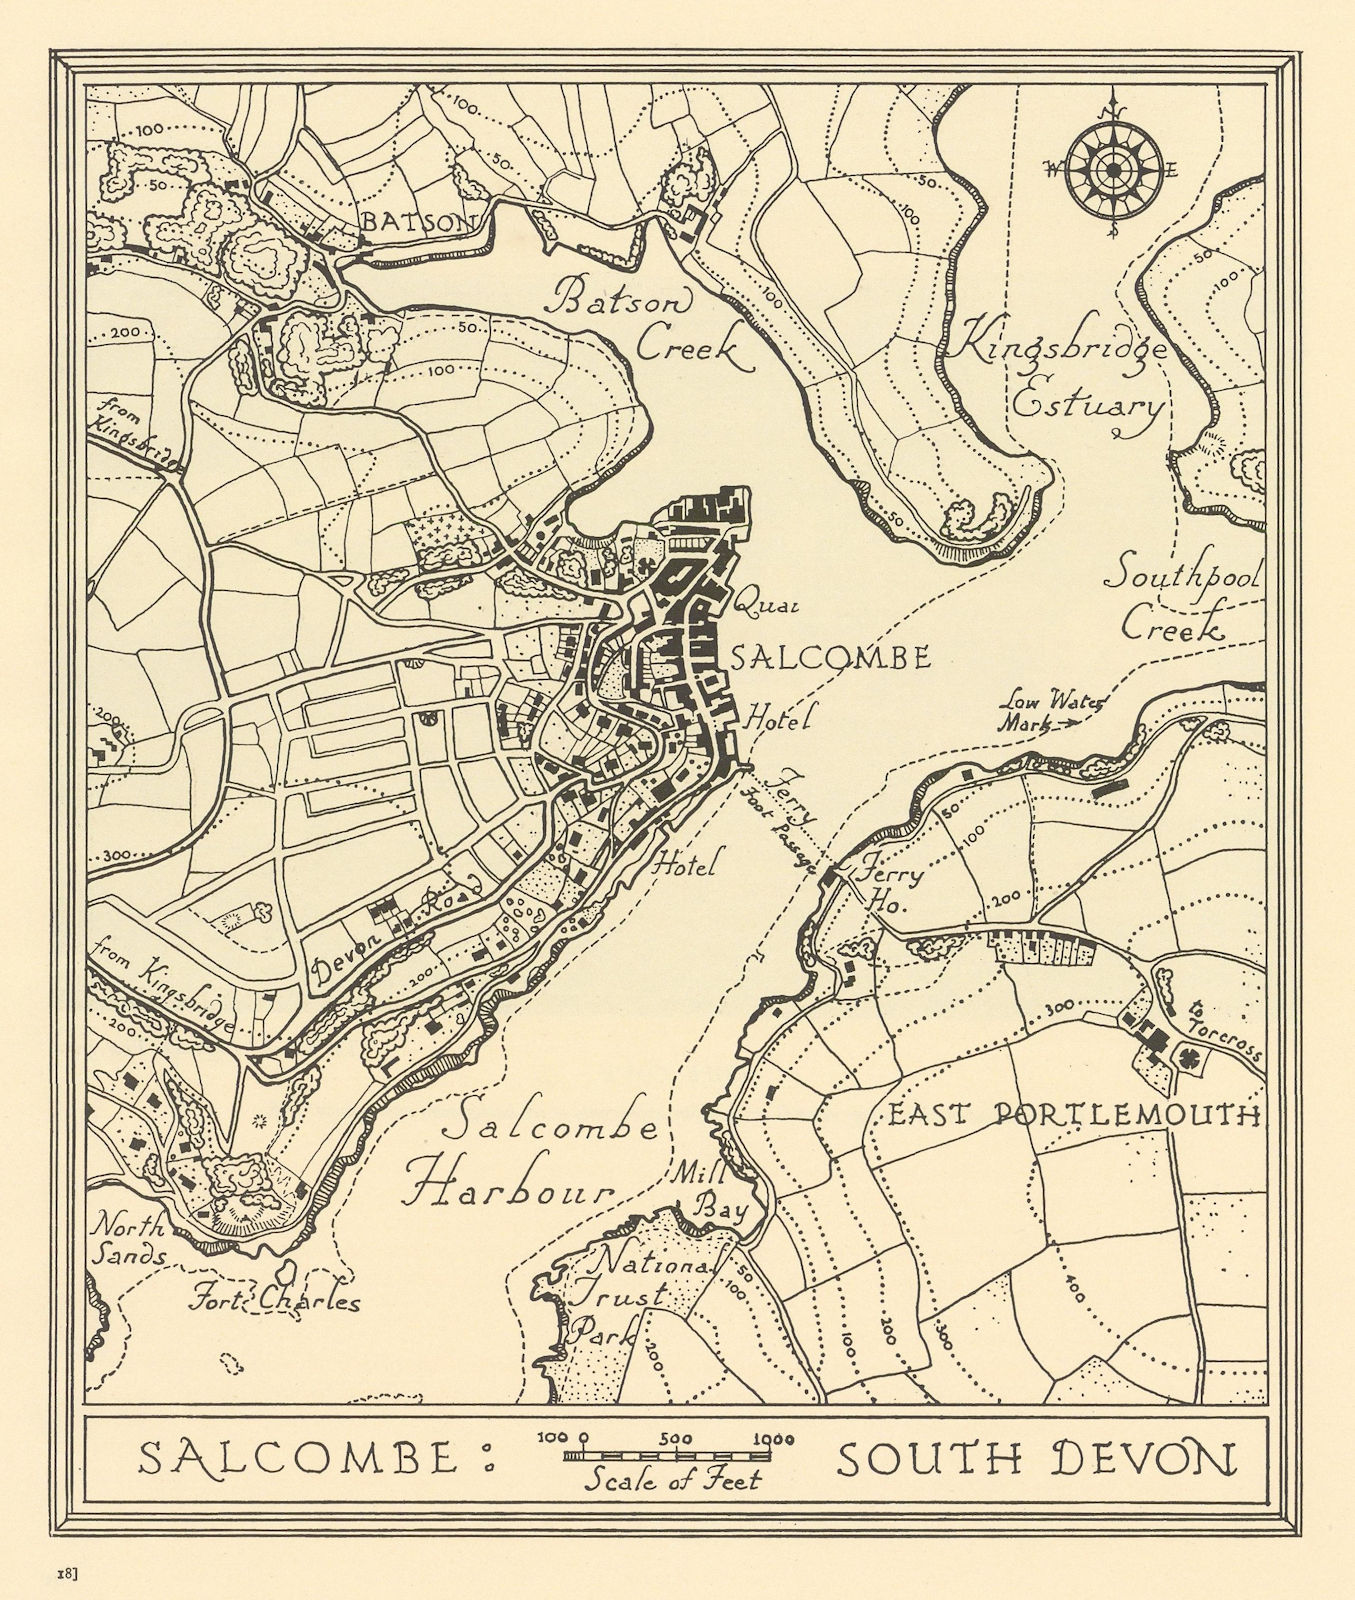 Associate Product Town plan of SALCOMBE Devon by William Harding Thompson 1932 old vintage map